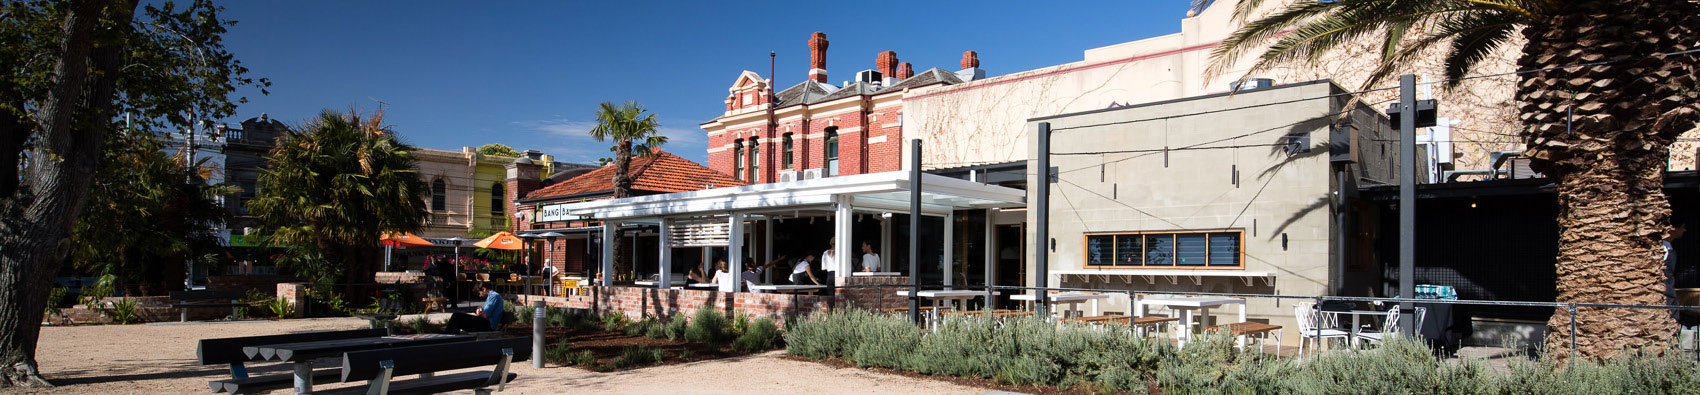 A view of the upgraded precinct at Glenhuntly Station. It shows Bang Bang Bar in the background with outdoor seating. There are trees on either side.